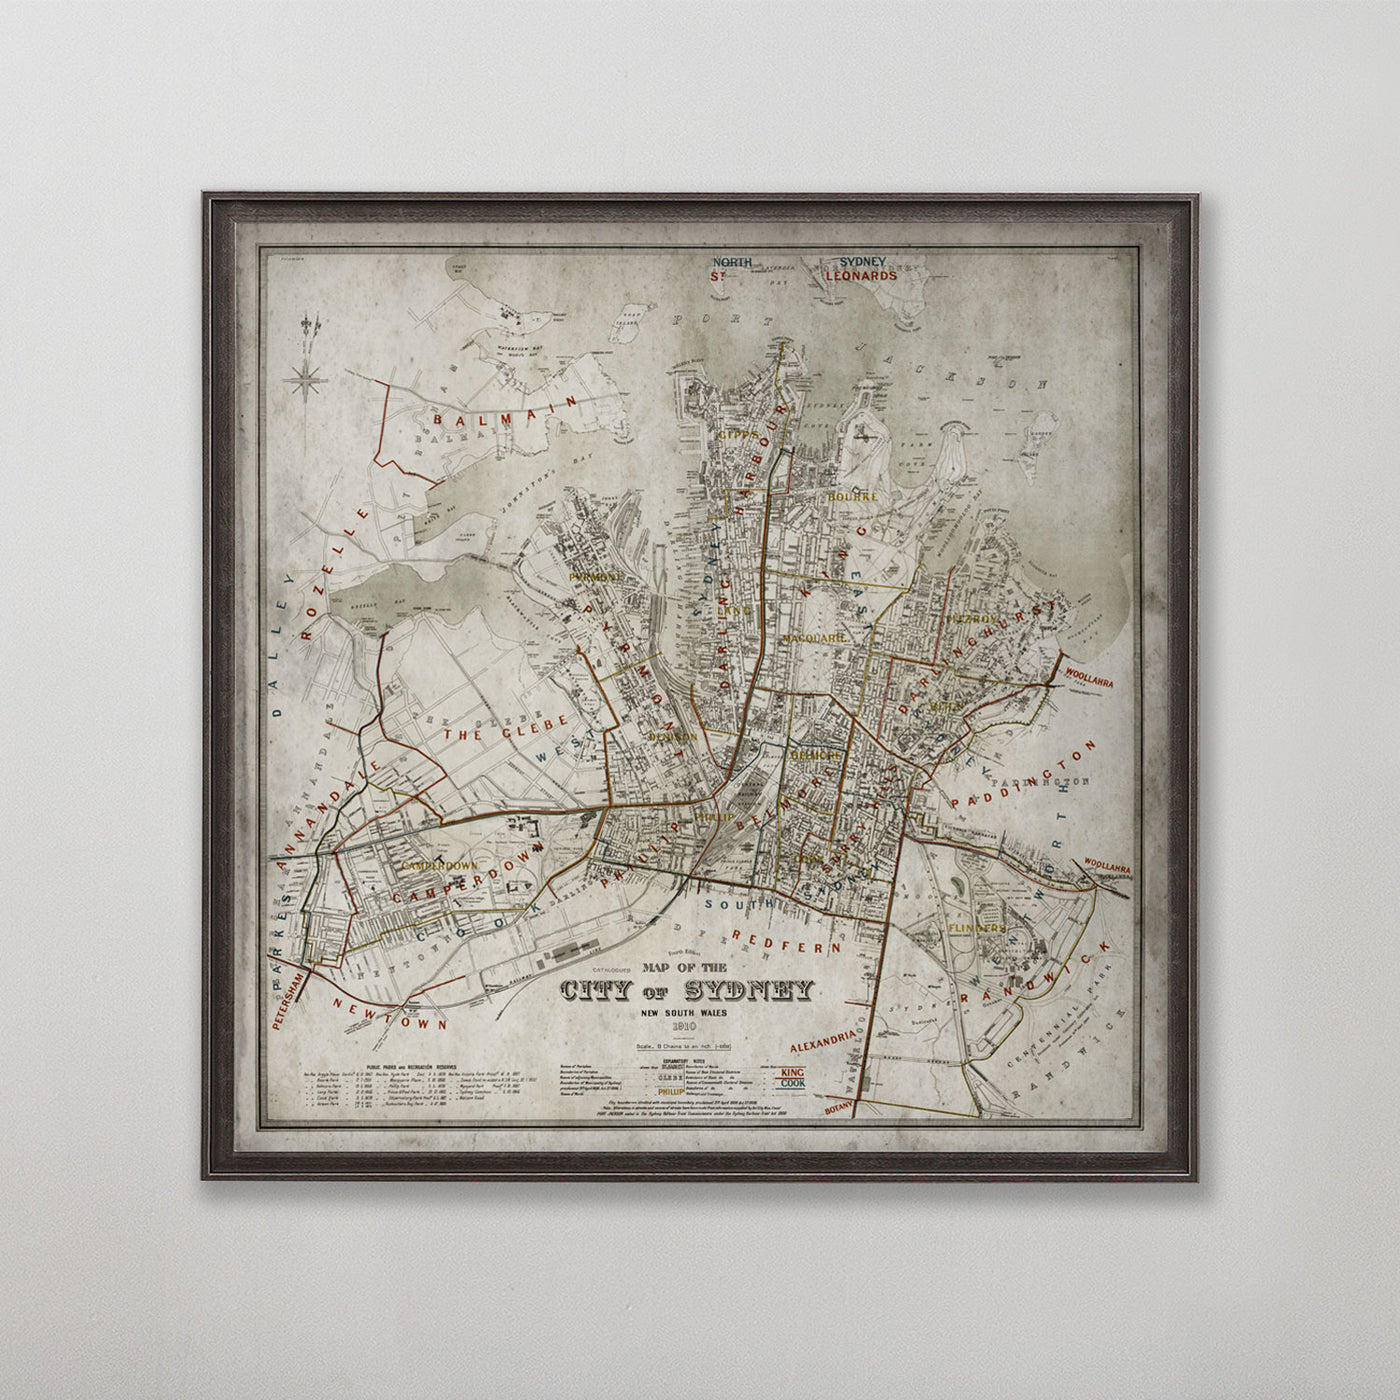 Old vintage historic map of Sydney, Australia for wall art home decor. 